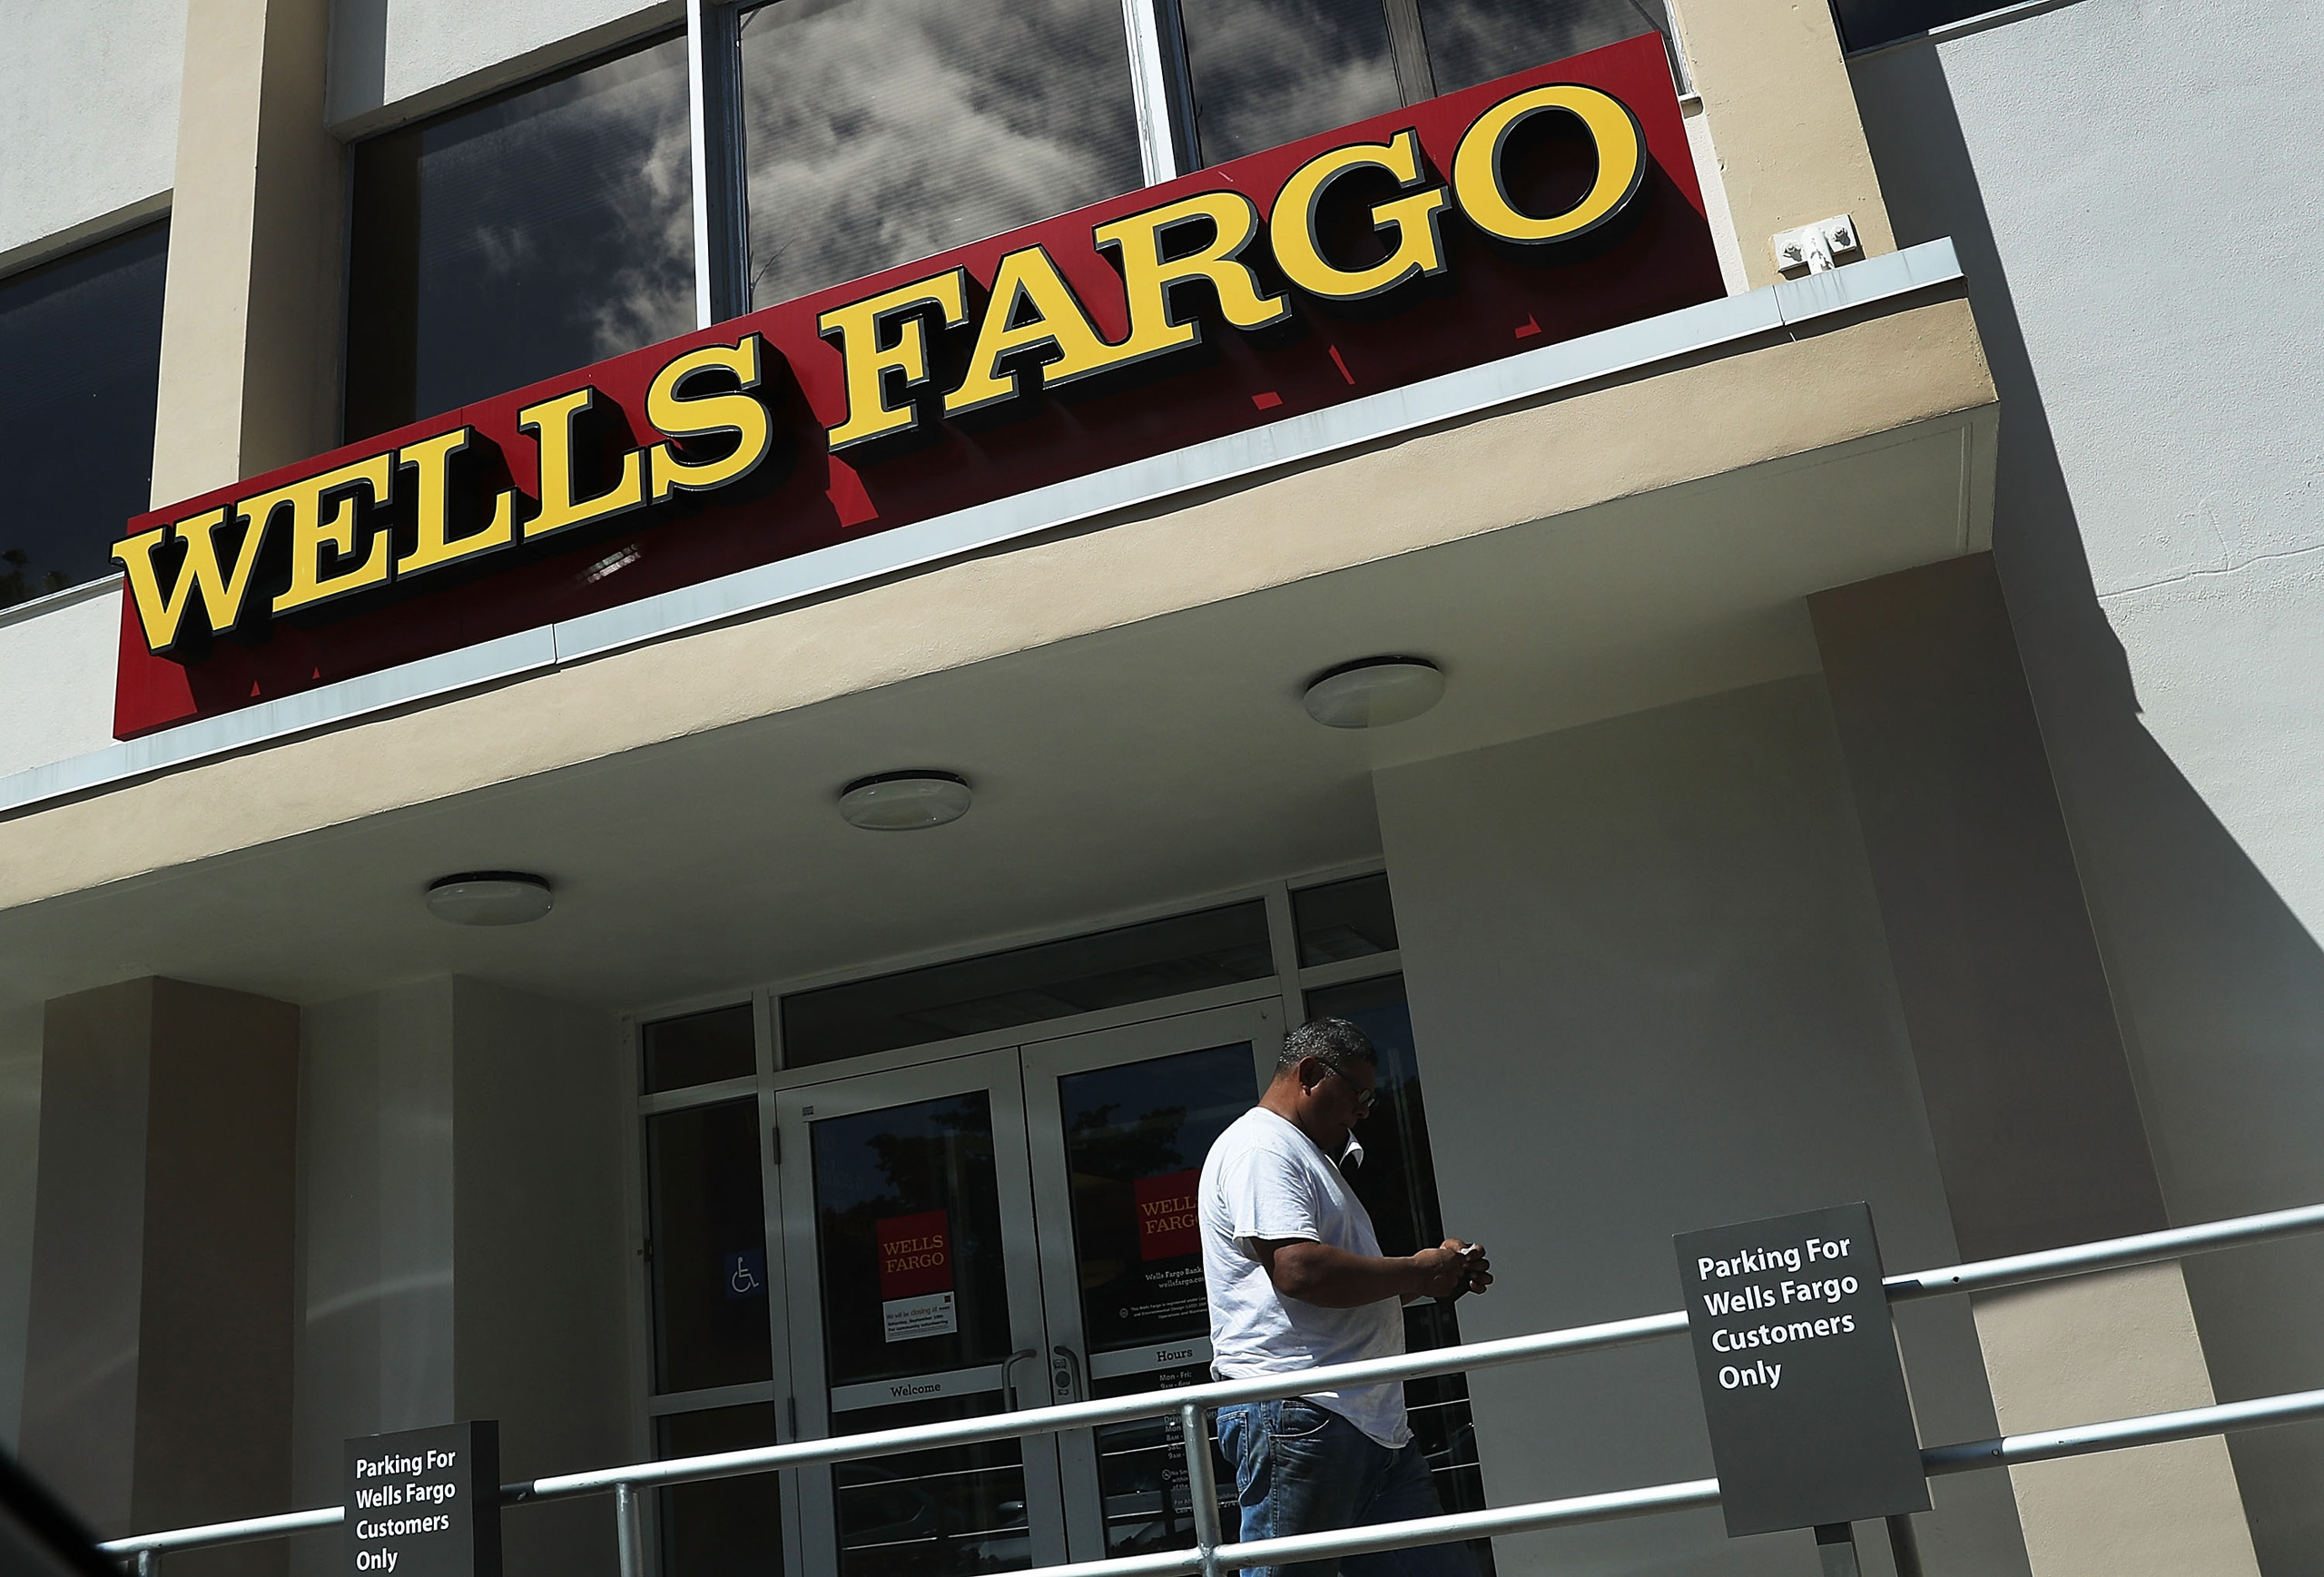 A Wells Fargo sign is seen on the exterior of one of their bank branches in Miami on September 9, 2016. (Joe Raedle—Getty Images)